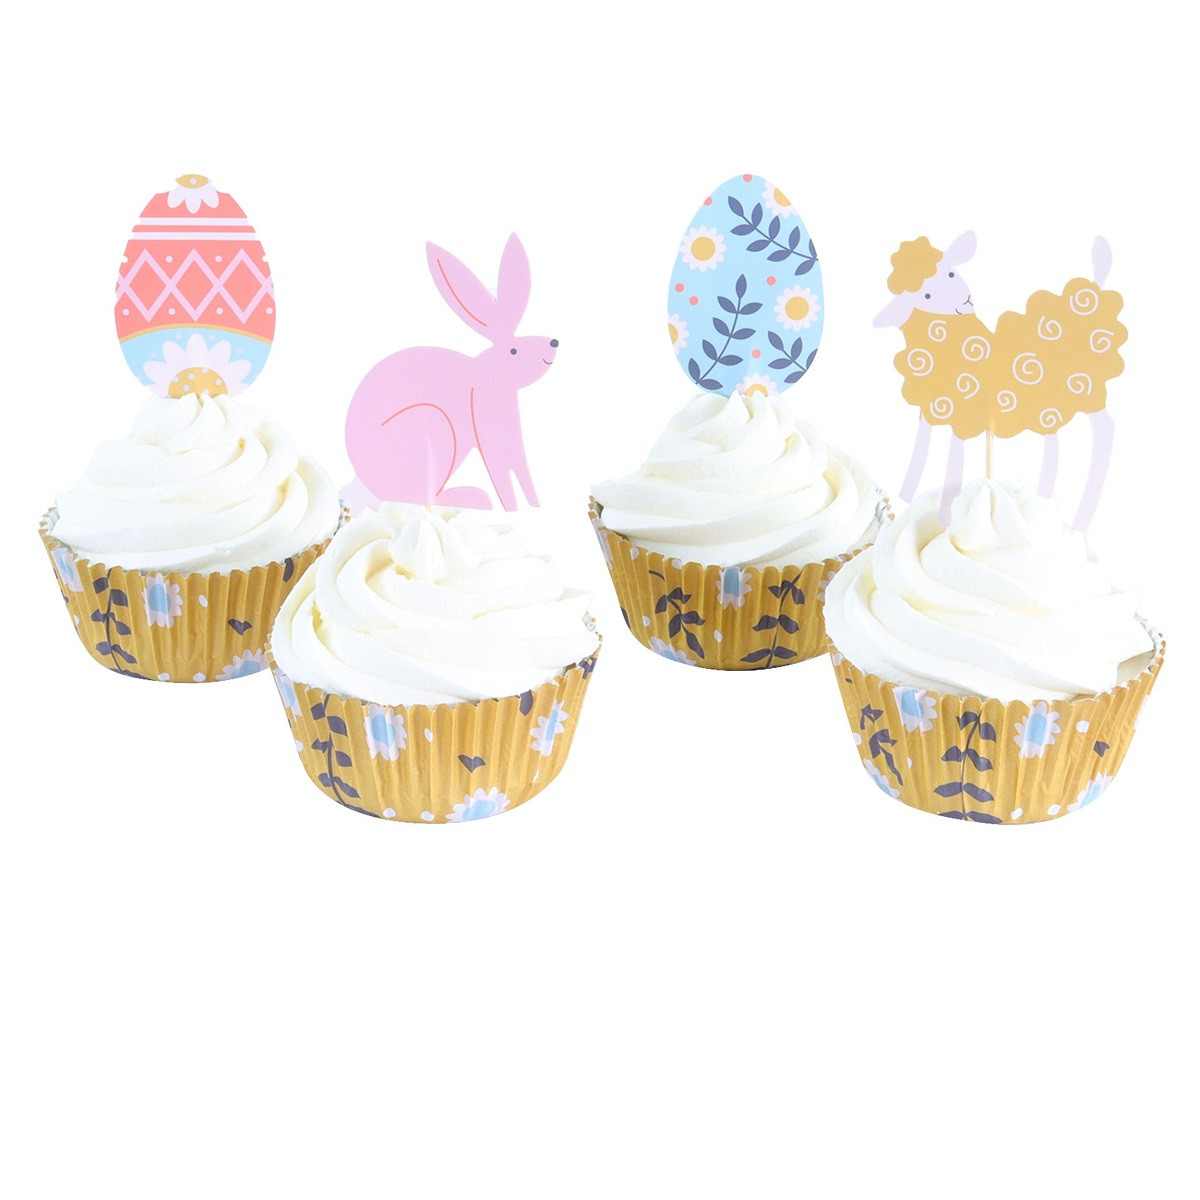 PME Cupcake Set Happy Easter 24st.